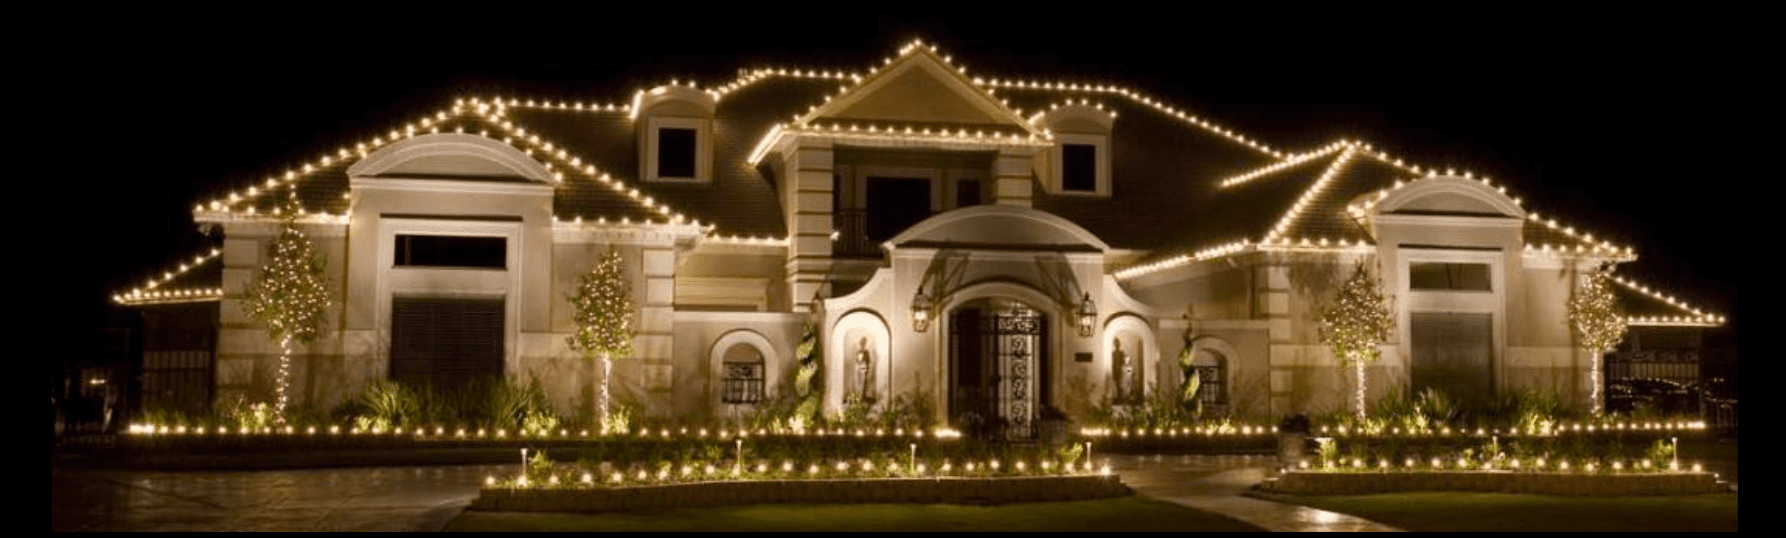 Holiday Lighting & Decoration Services - Roofline and Hardscapes Lighting